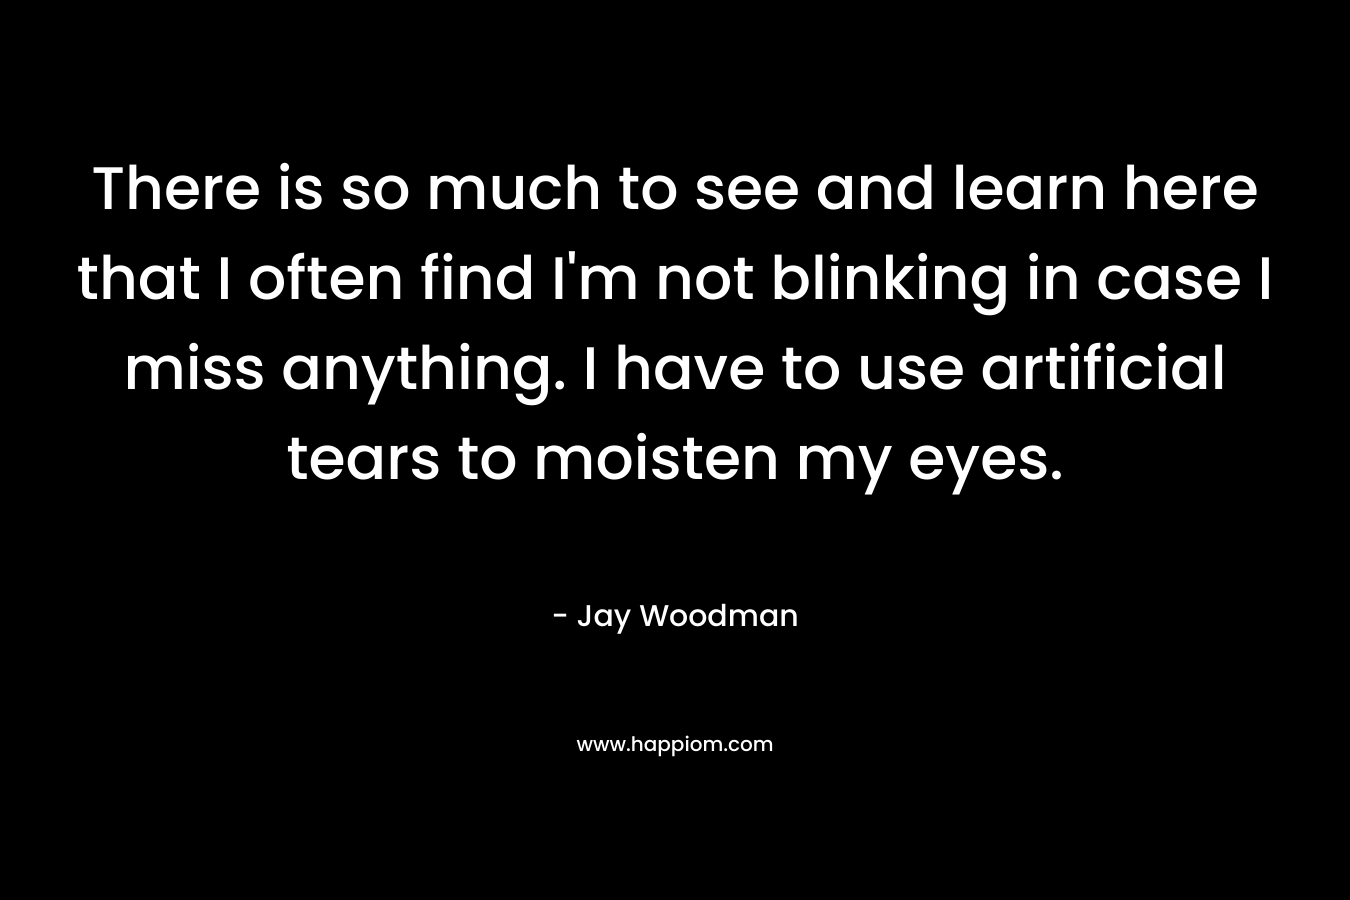 There is so much to see and learn here that I often find I’m not blinking in case I miss anything. I have to use artificial tears to moisten my eyes. – Jay Woodman